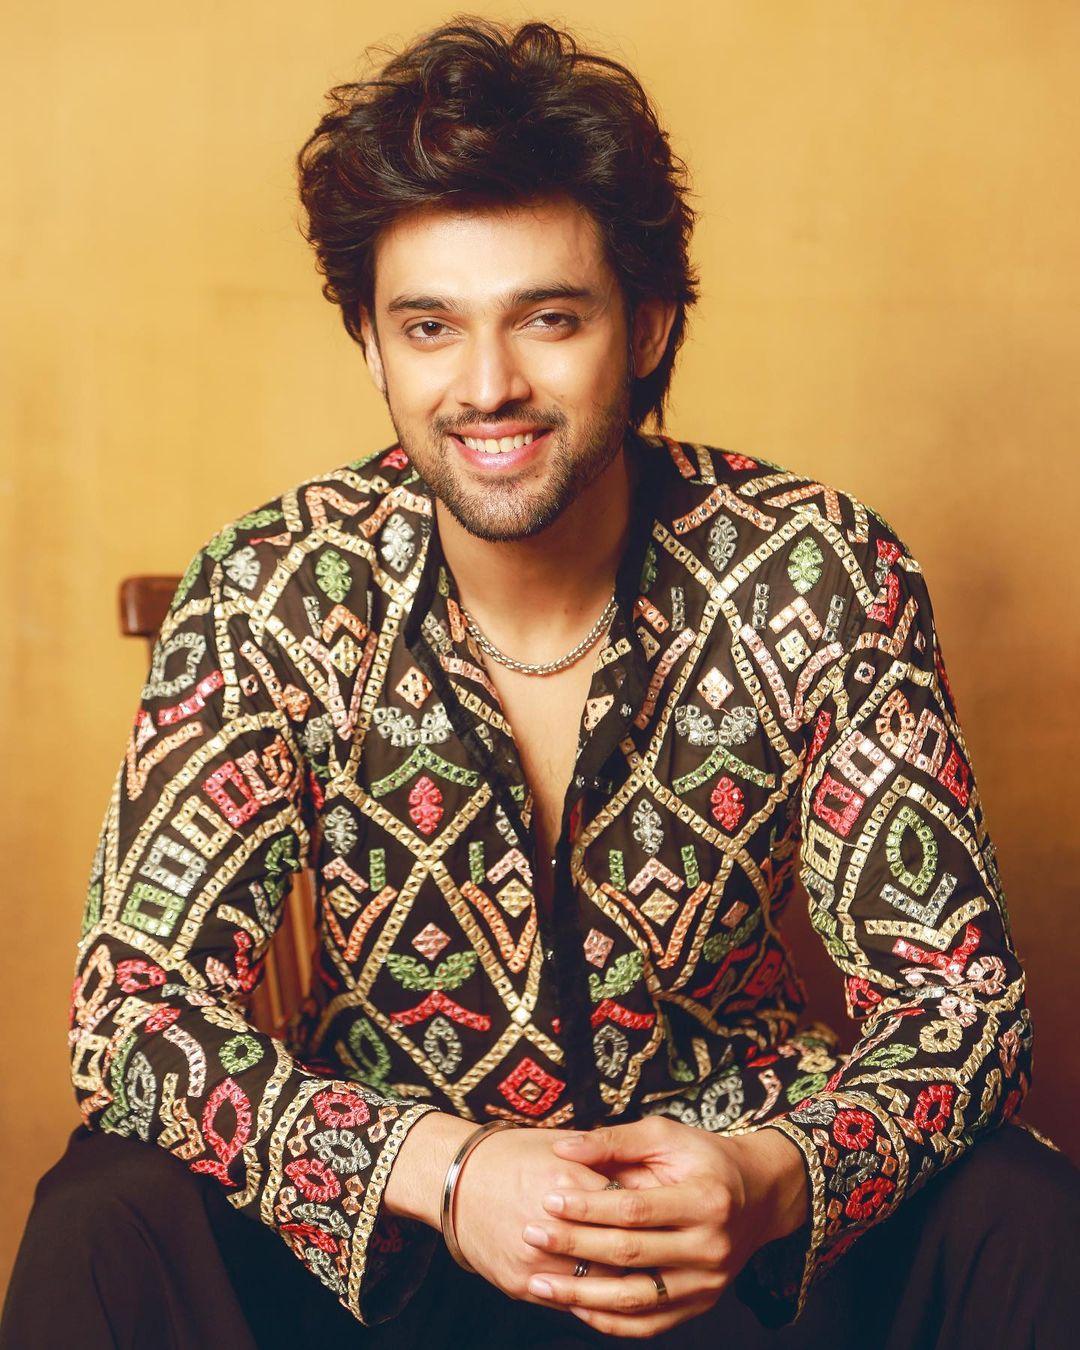 In the mood to wear something colourful yet simple? Then, Parth's kurta set is what you're looking for. In this look, Parth opted for a multi-colored embroidered kurta, and this one is a must-have look